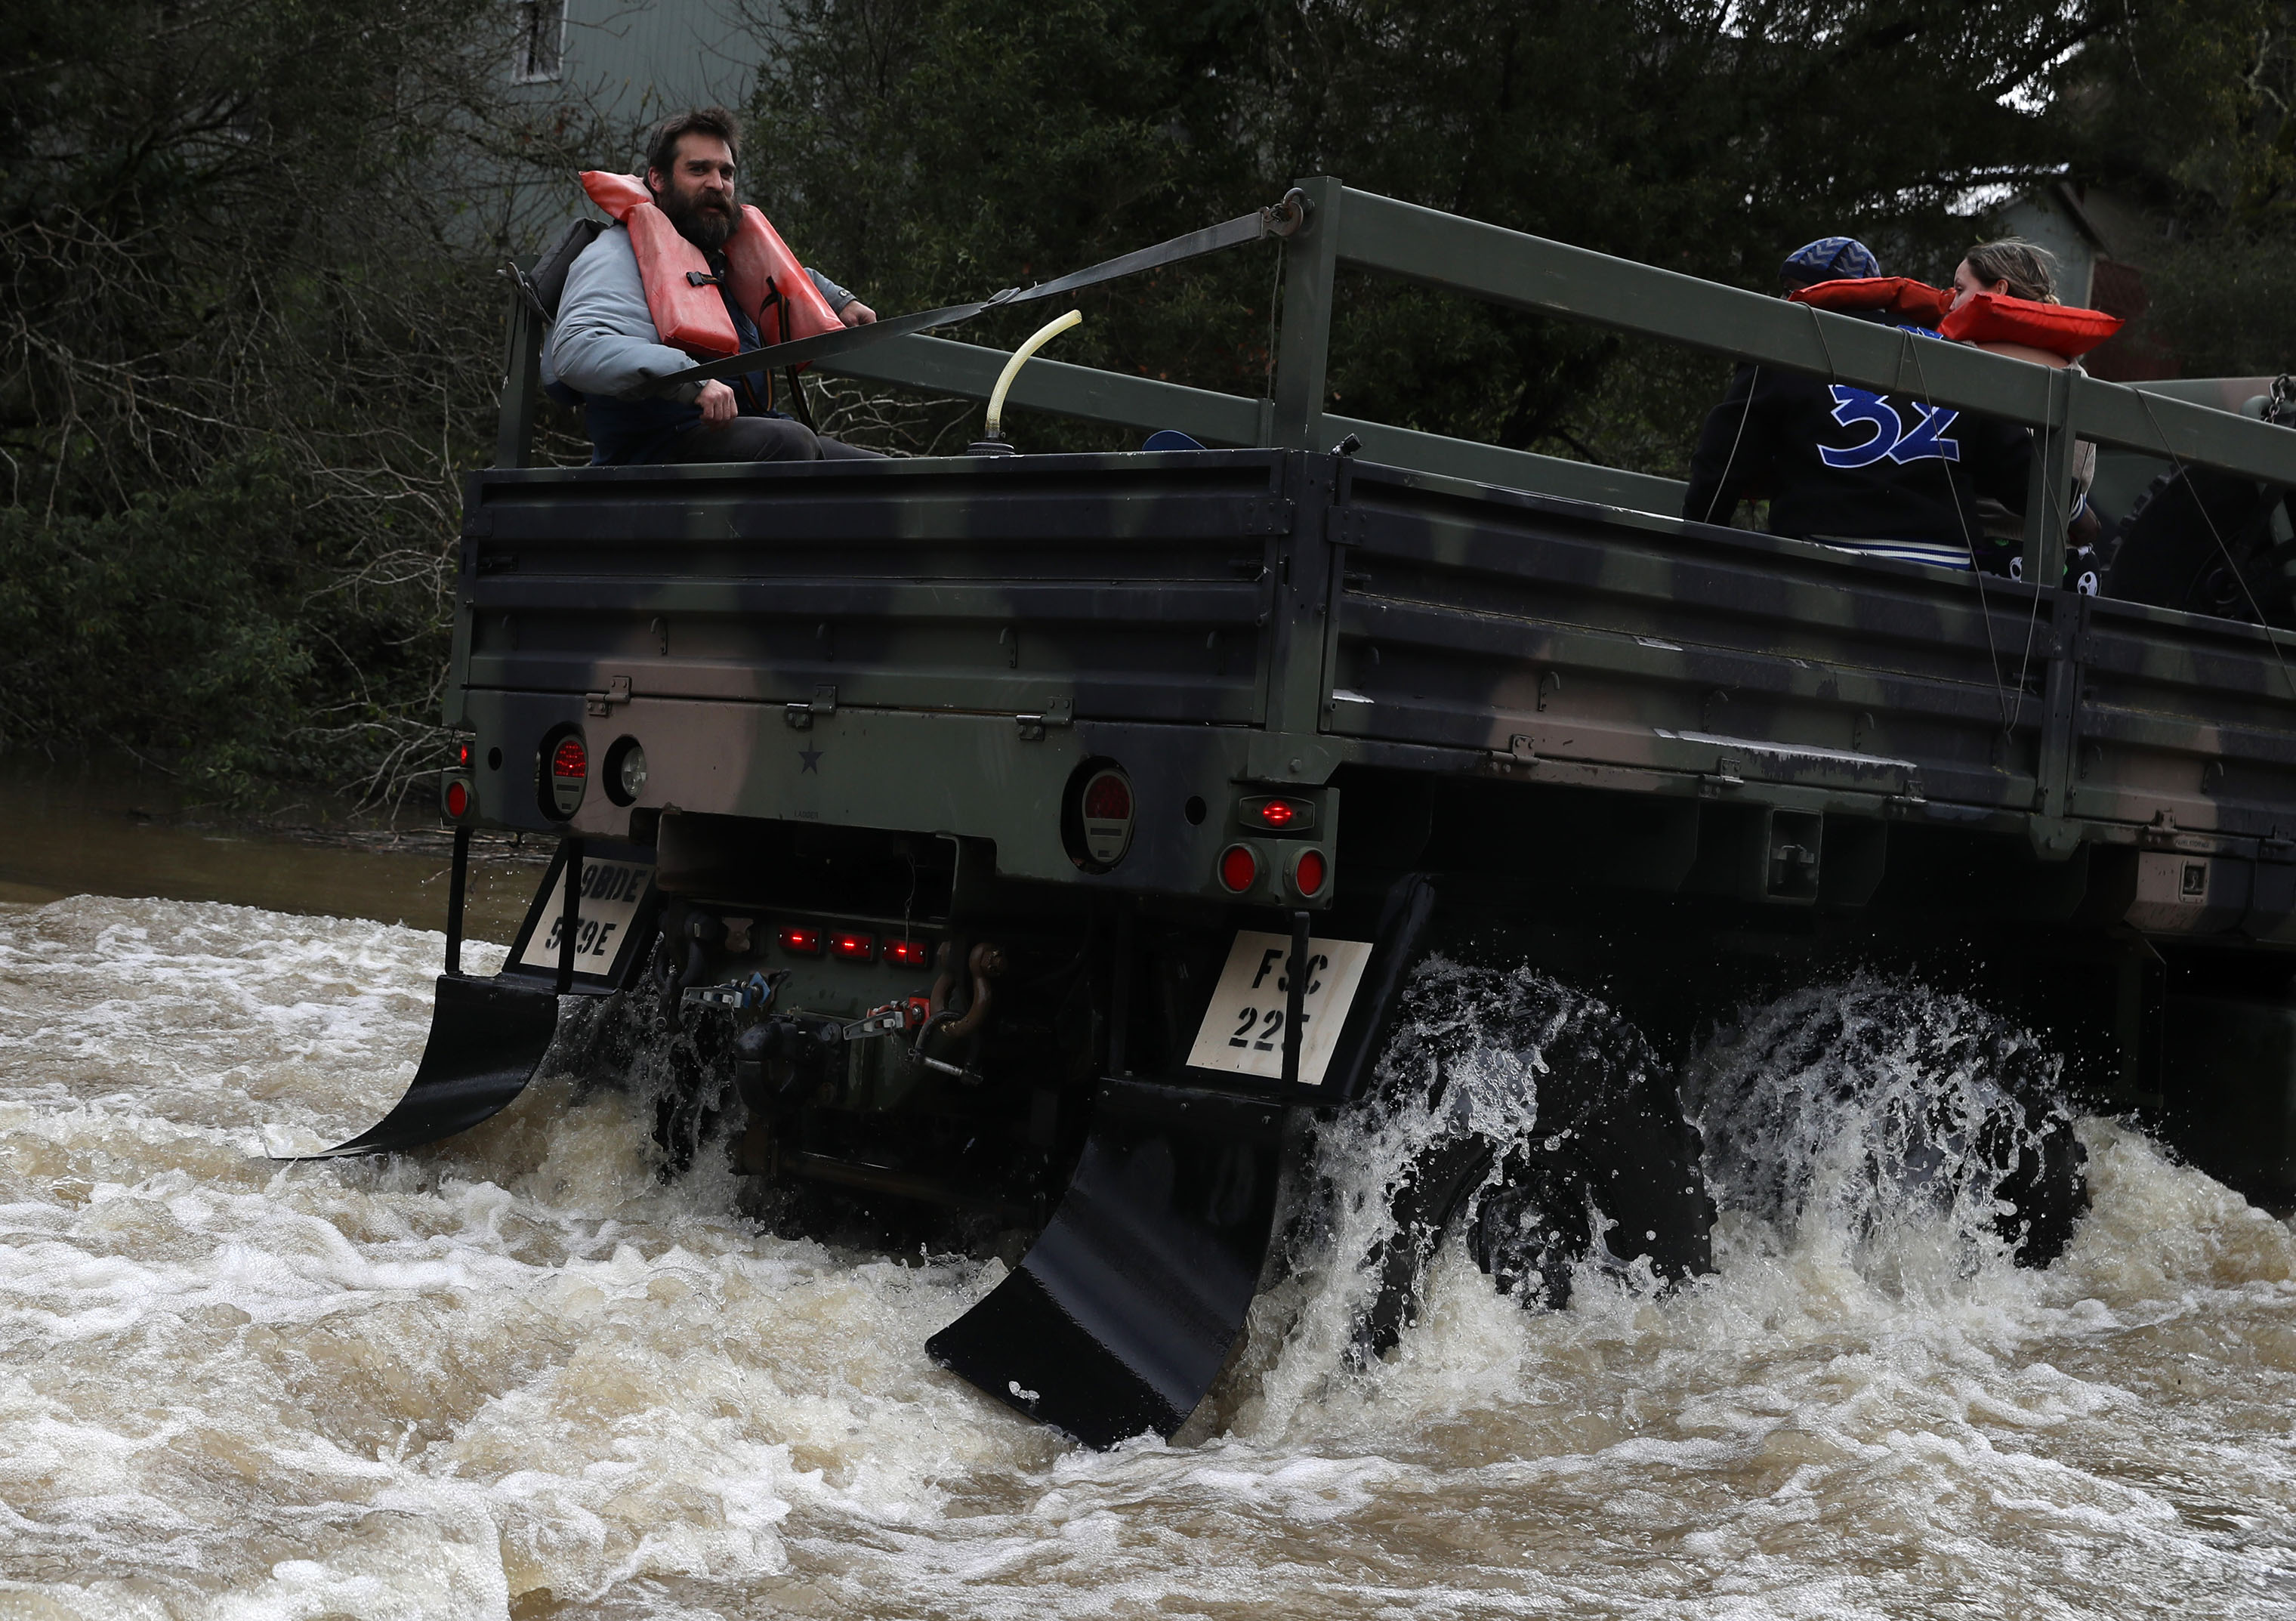 Rescue workers evacuate residents on a truck as they drive through a flooded neighborhood on Feb. 27, 2019 in Forestville, California. (Justin Sullivan—Getty Images)